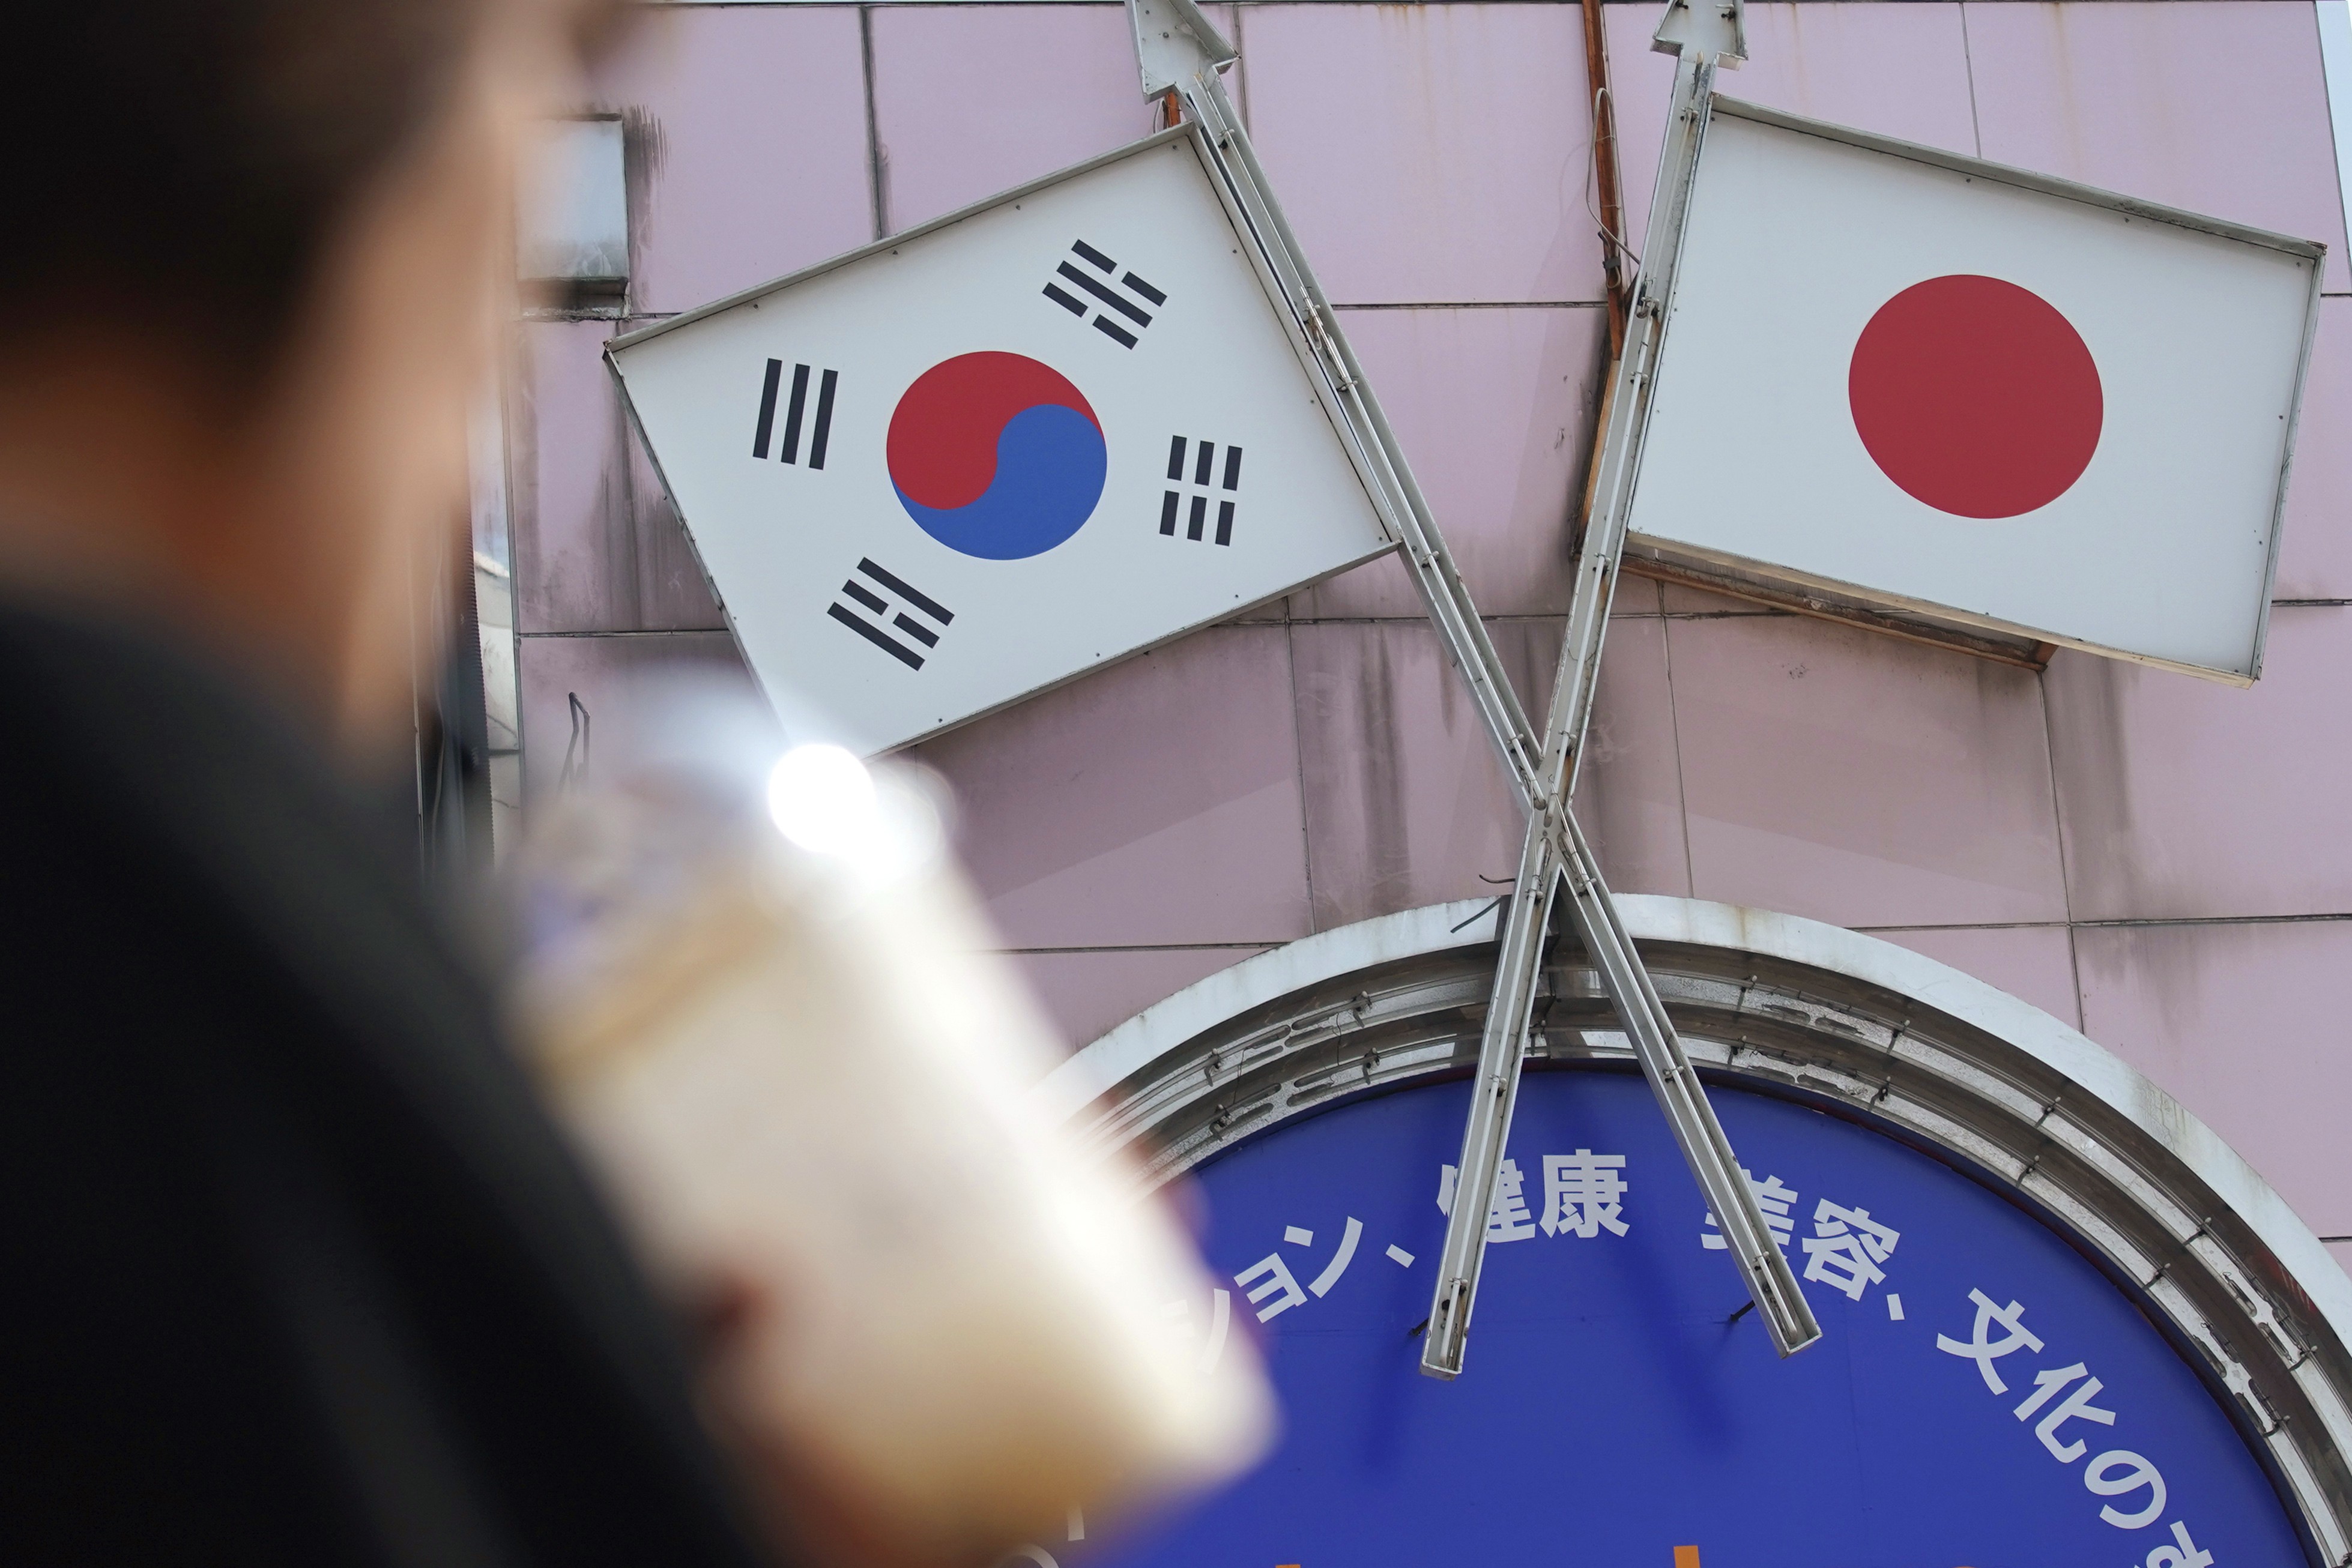 Sales of Japanese beer, cars and clothing in South Korea have declined since the dispute erupted in early July. Photo: AP